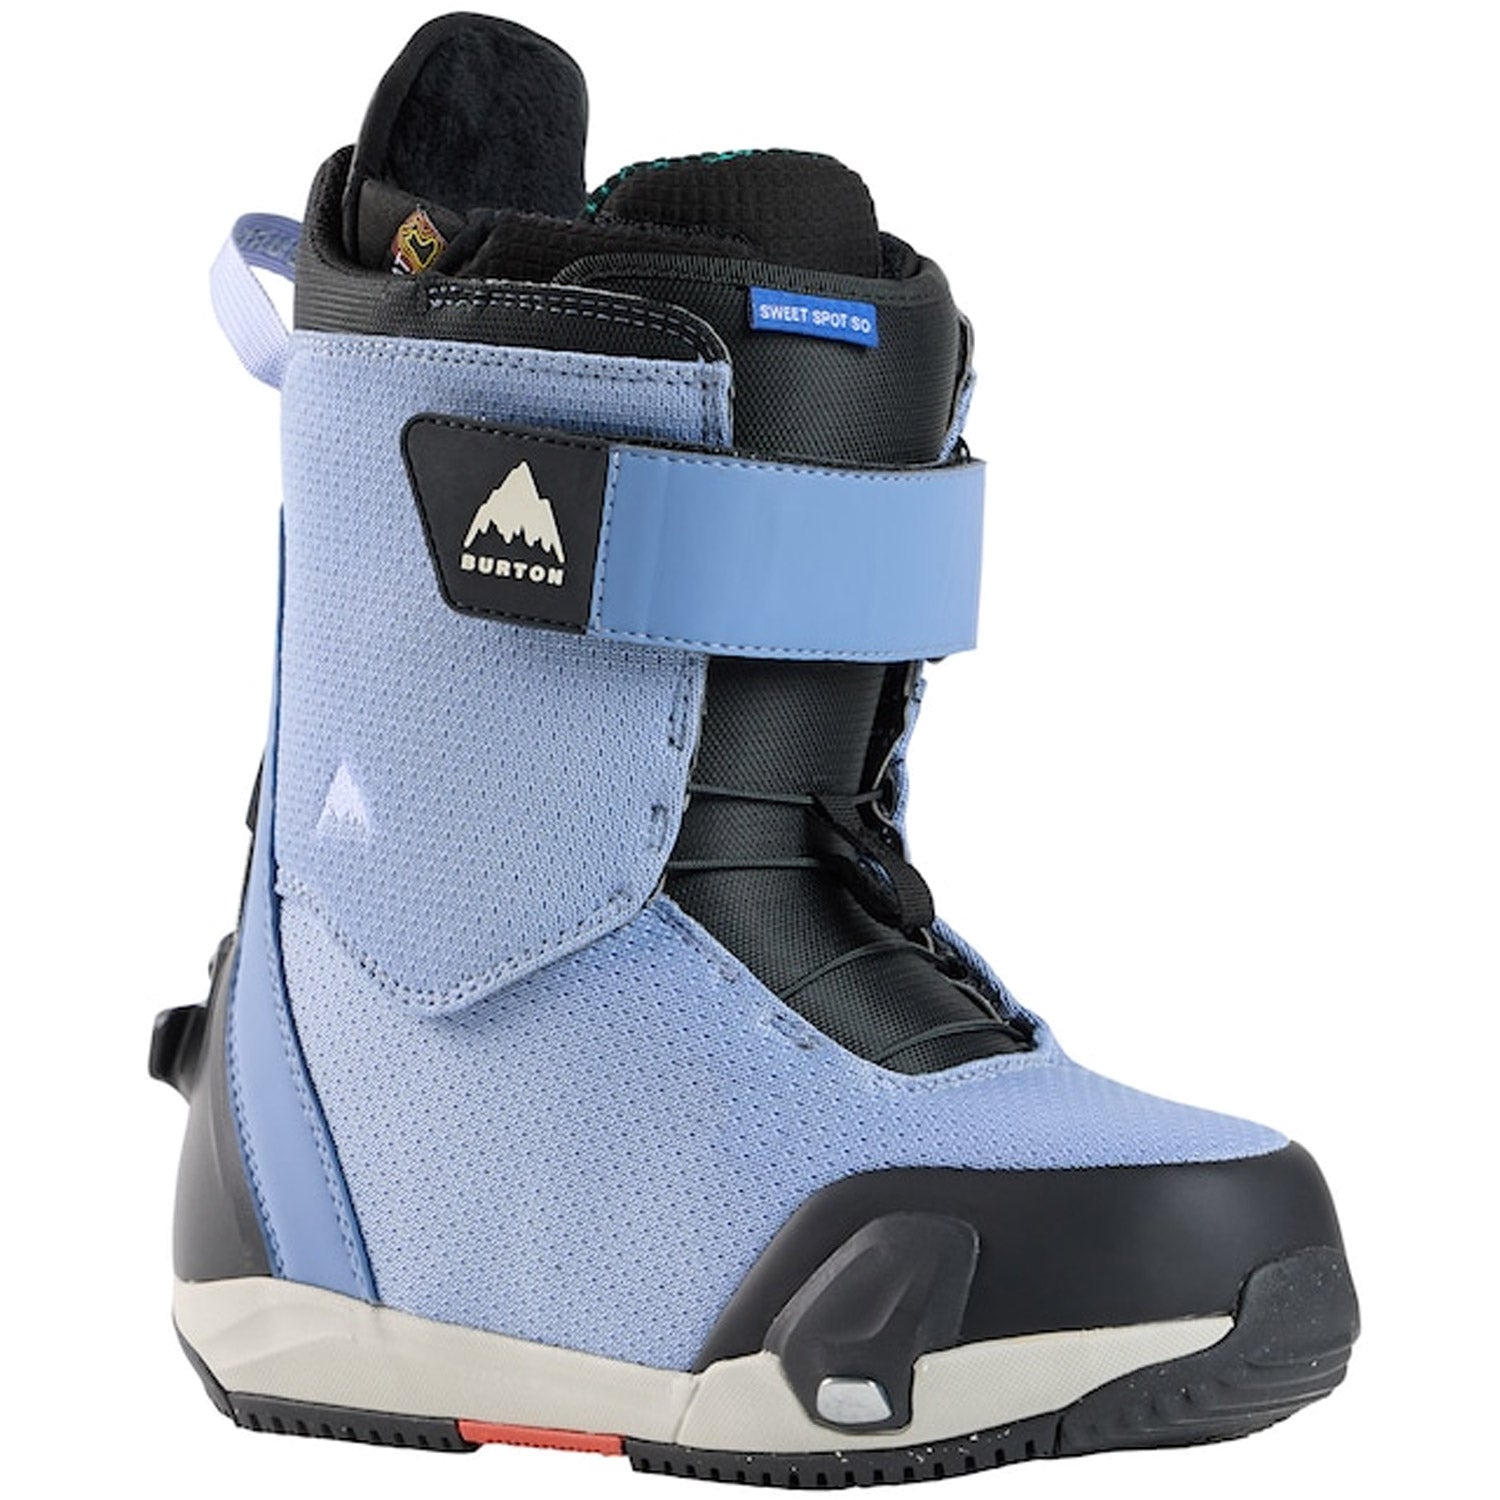 Women's Ritual Step On Sweetspot Snowboard Boots